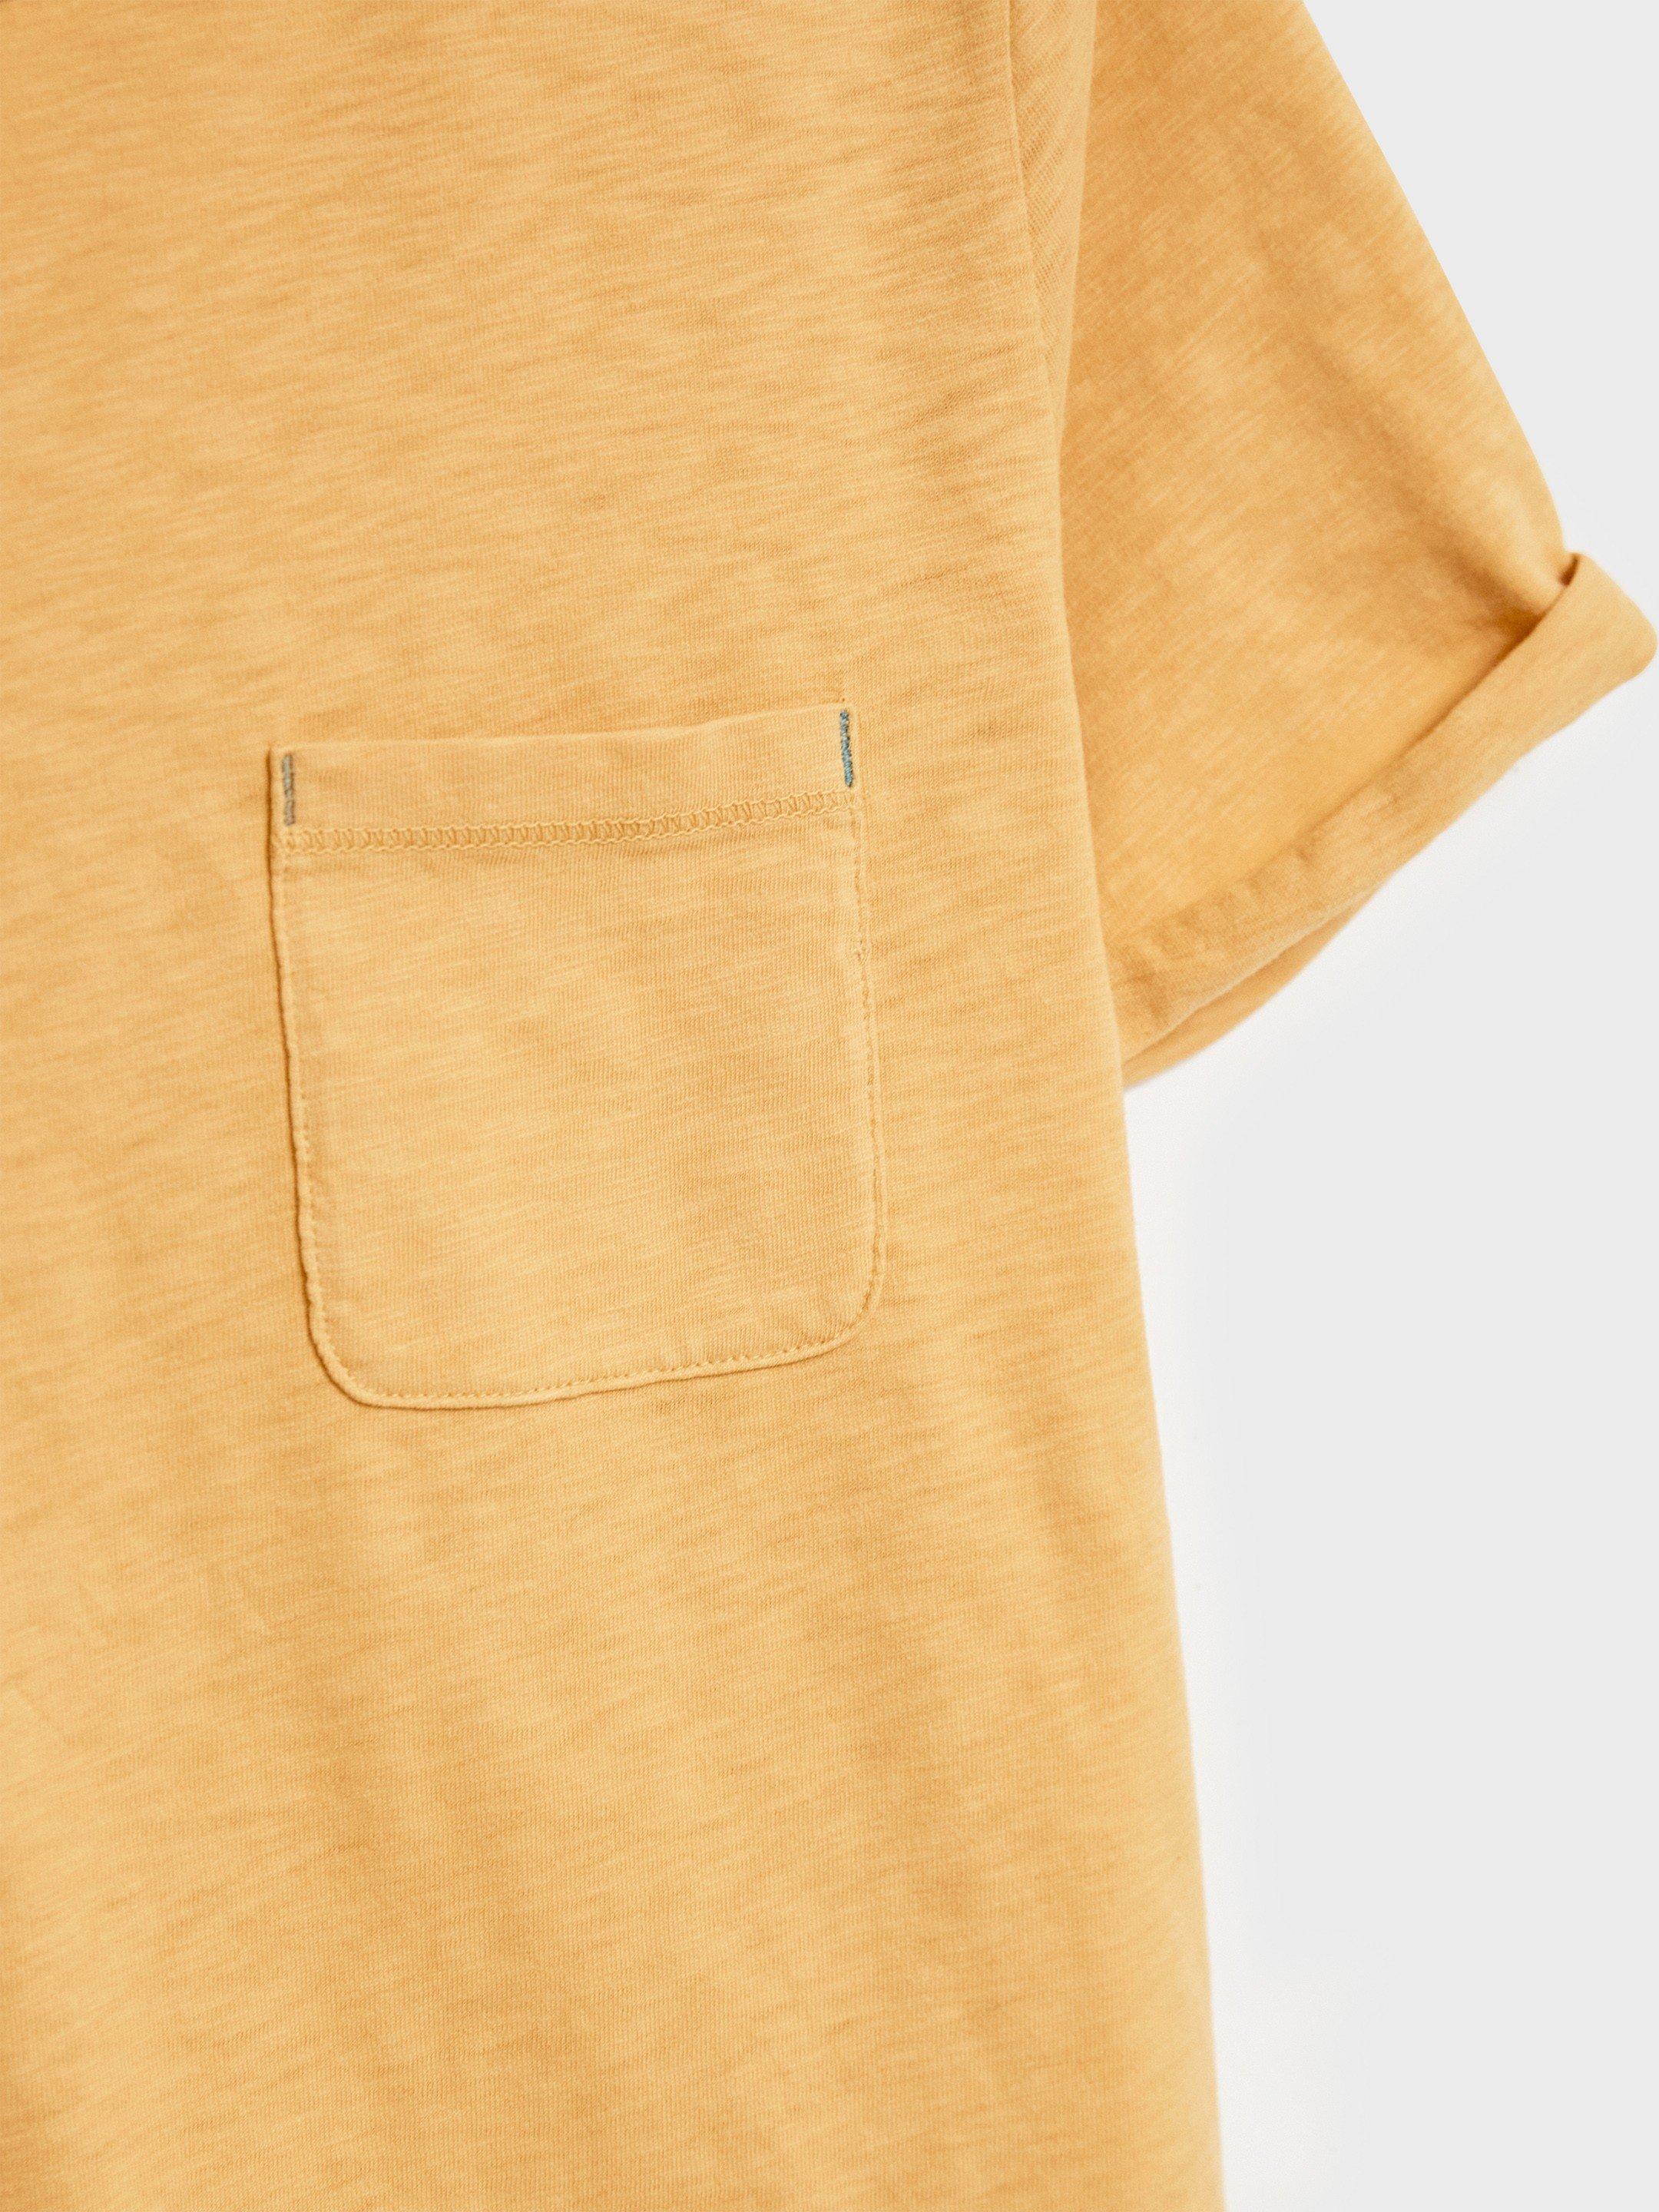 Neo Cotton Tee in MID YELLOW - FLAT DETAIL